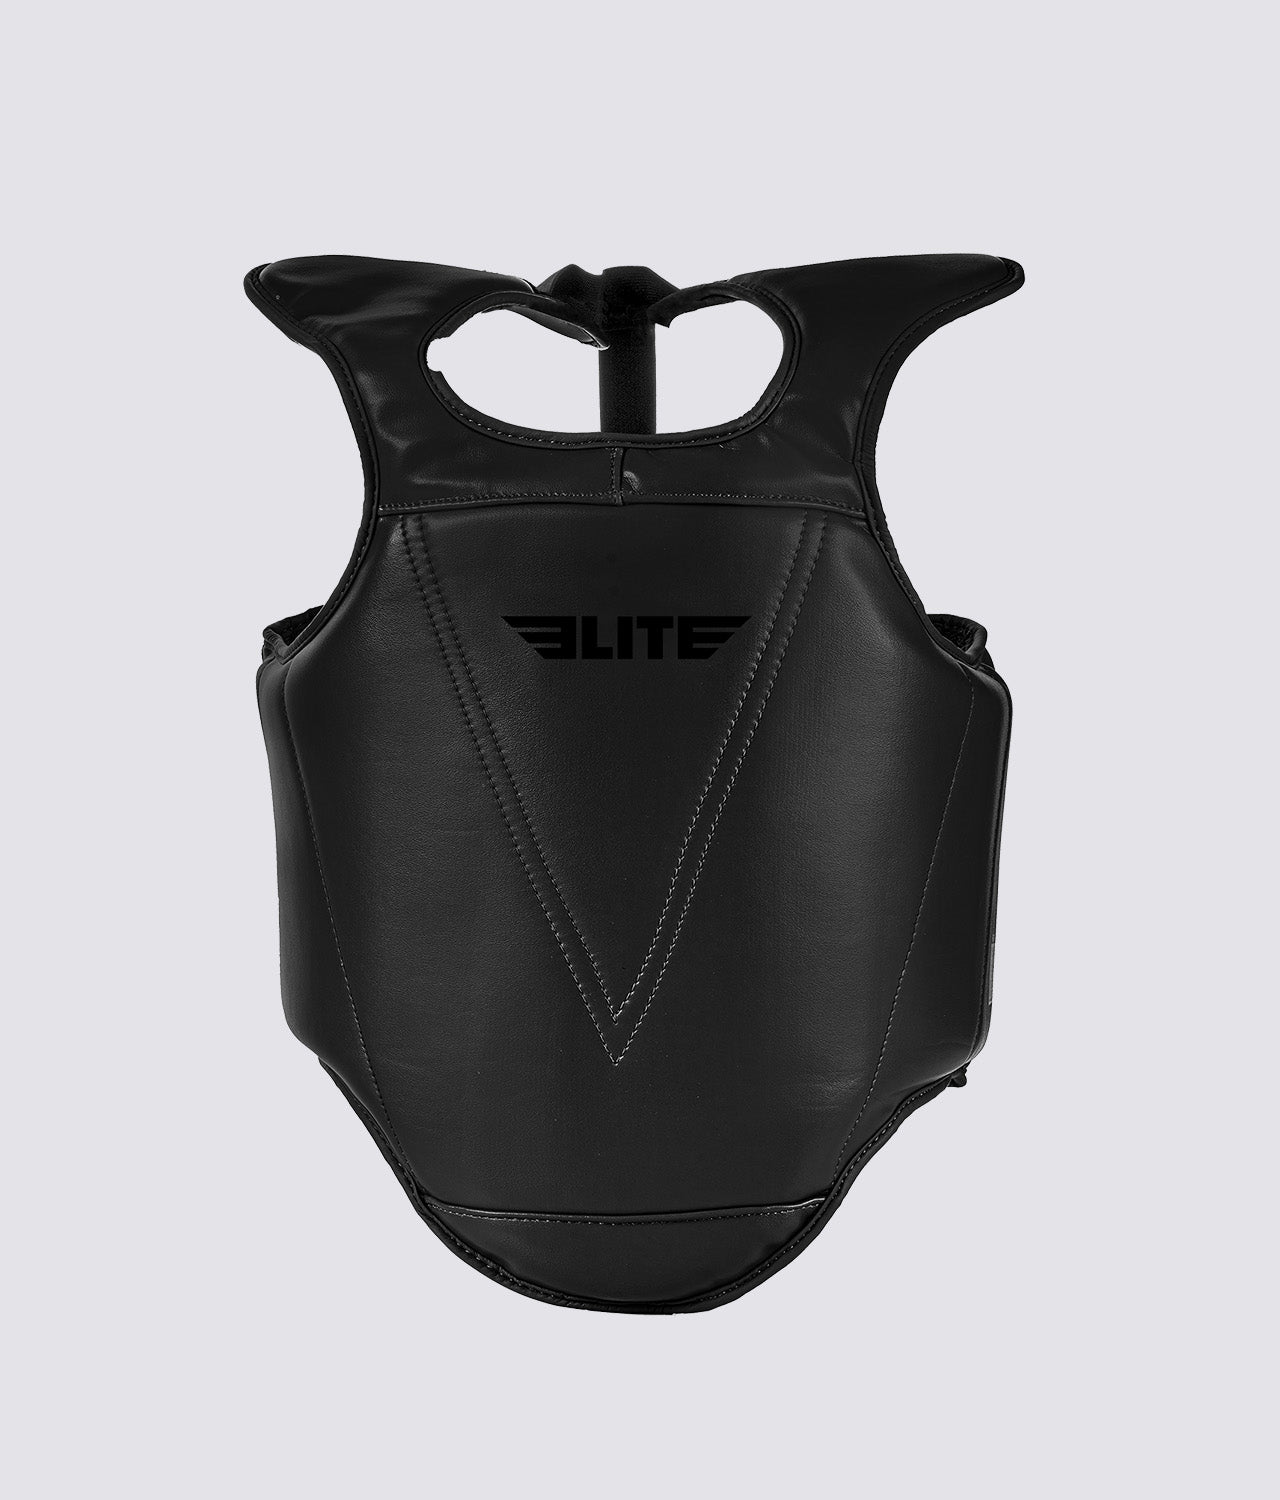 Kids' Black MMA Chest Guard : 4 to 8 Years